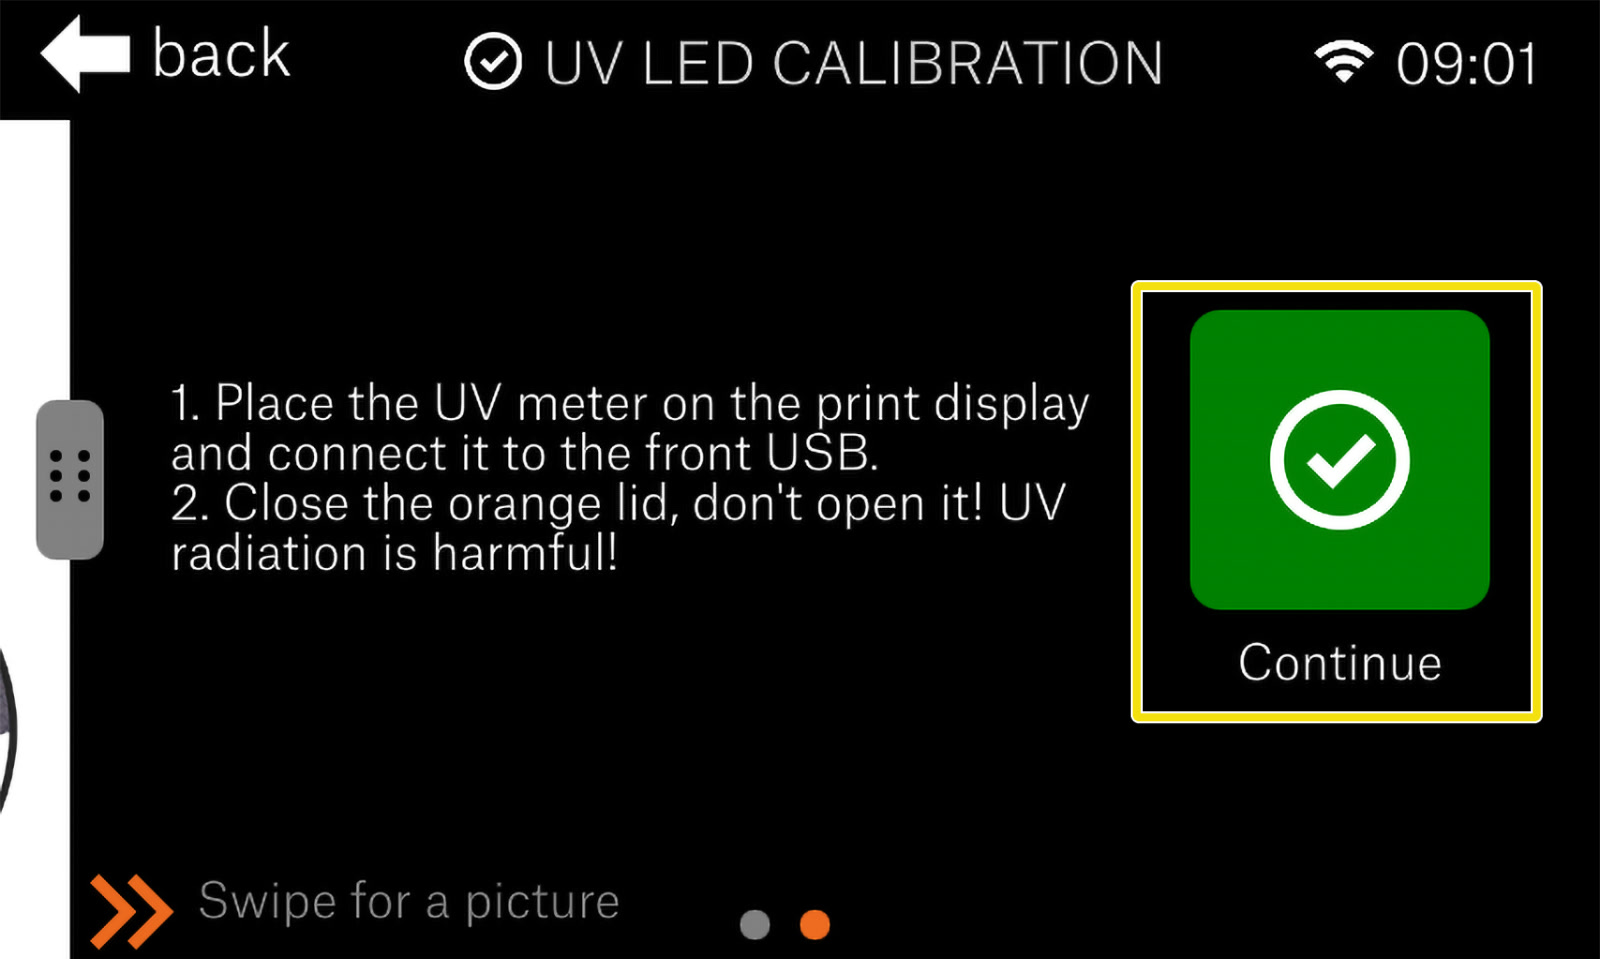 UV calibrator placement and connection